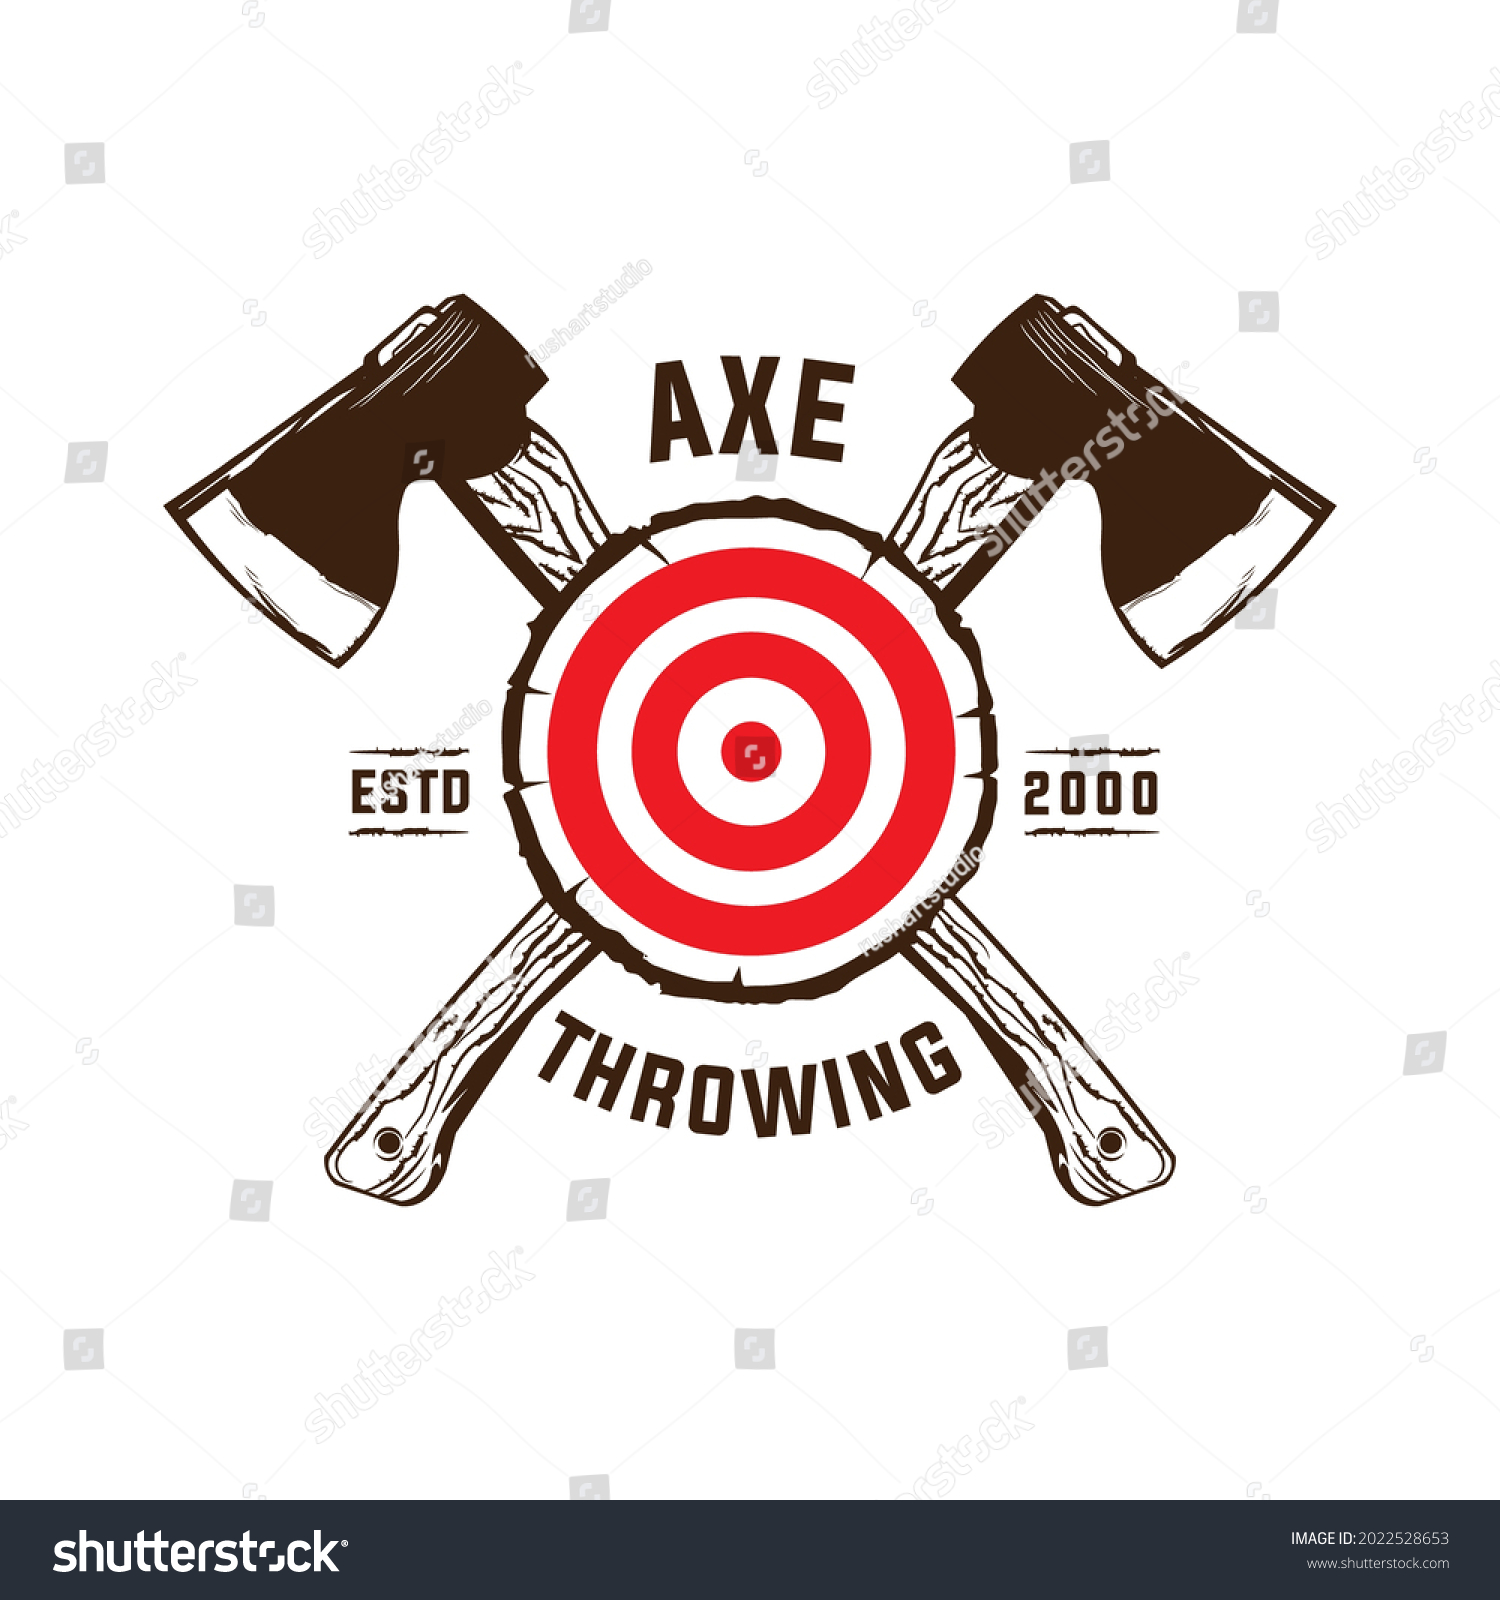 SVG of Axe Throwing Club logo in wood target, good for axe club logo design svg